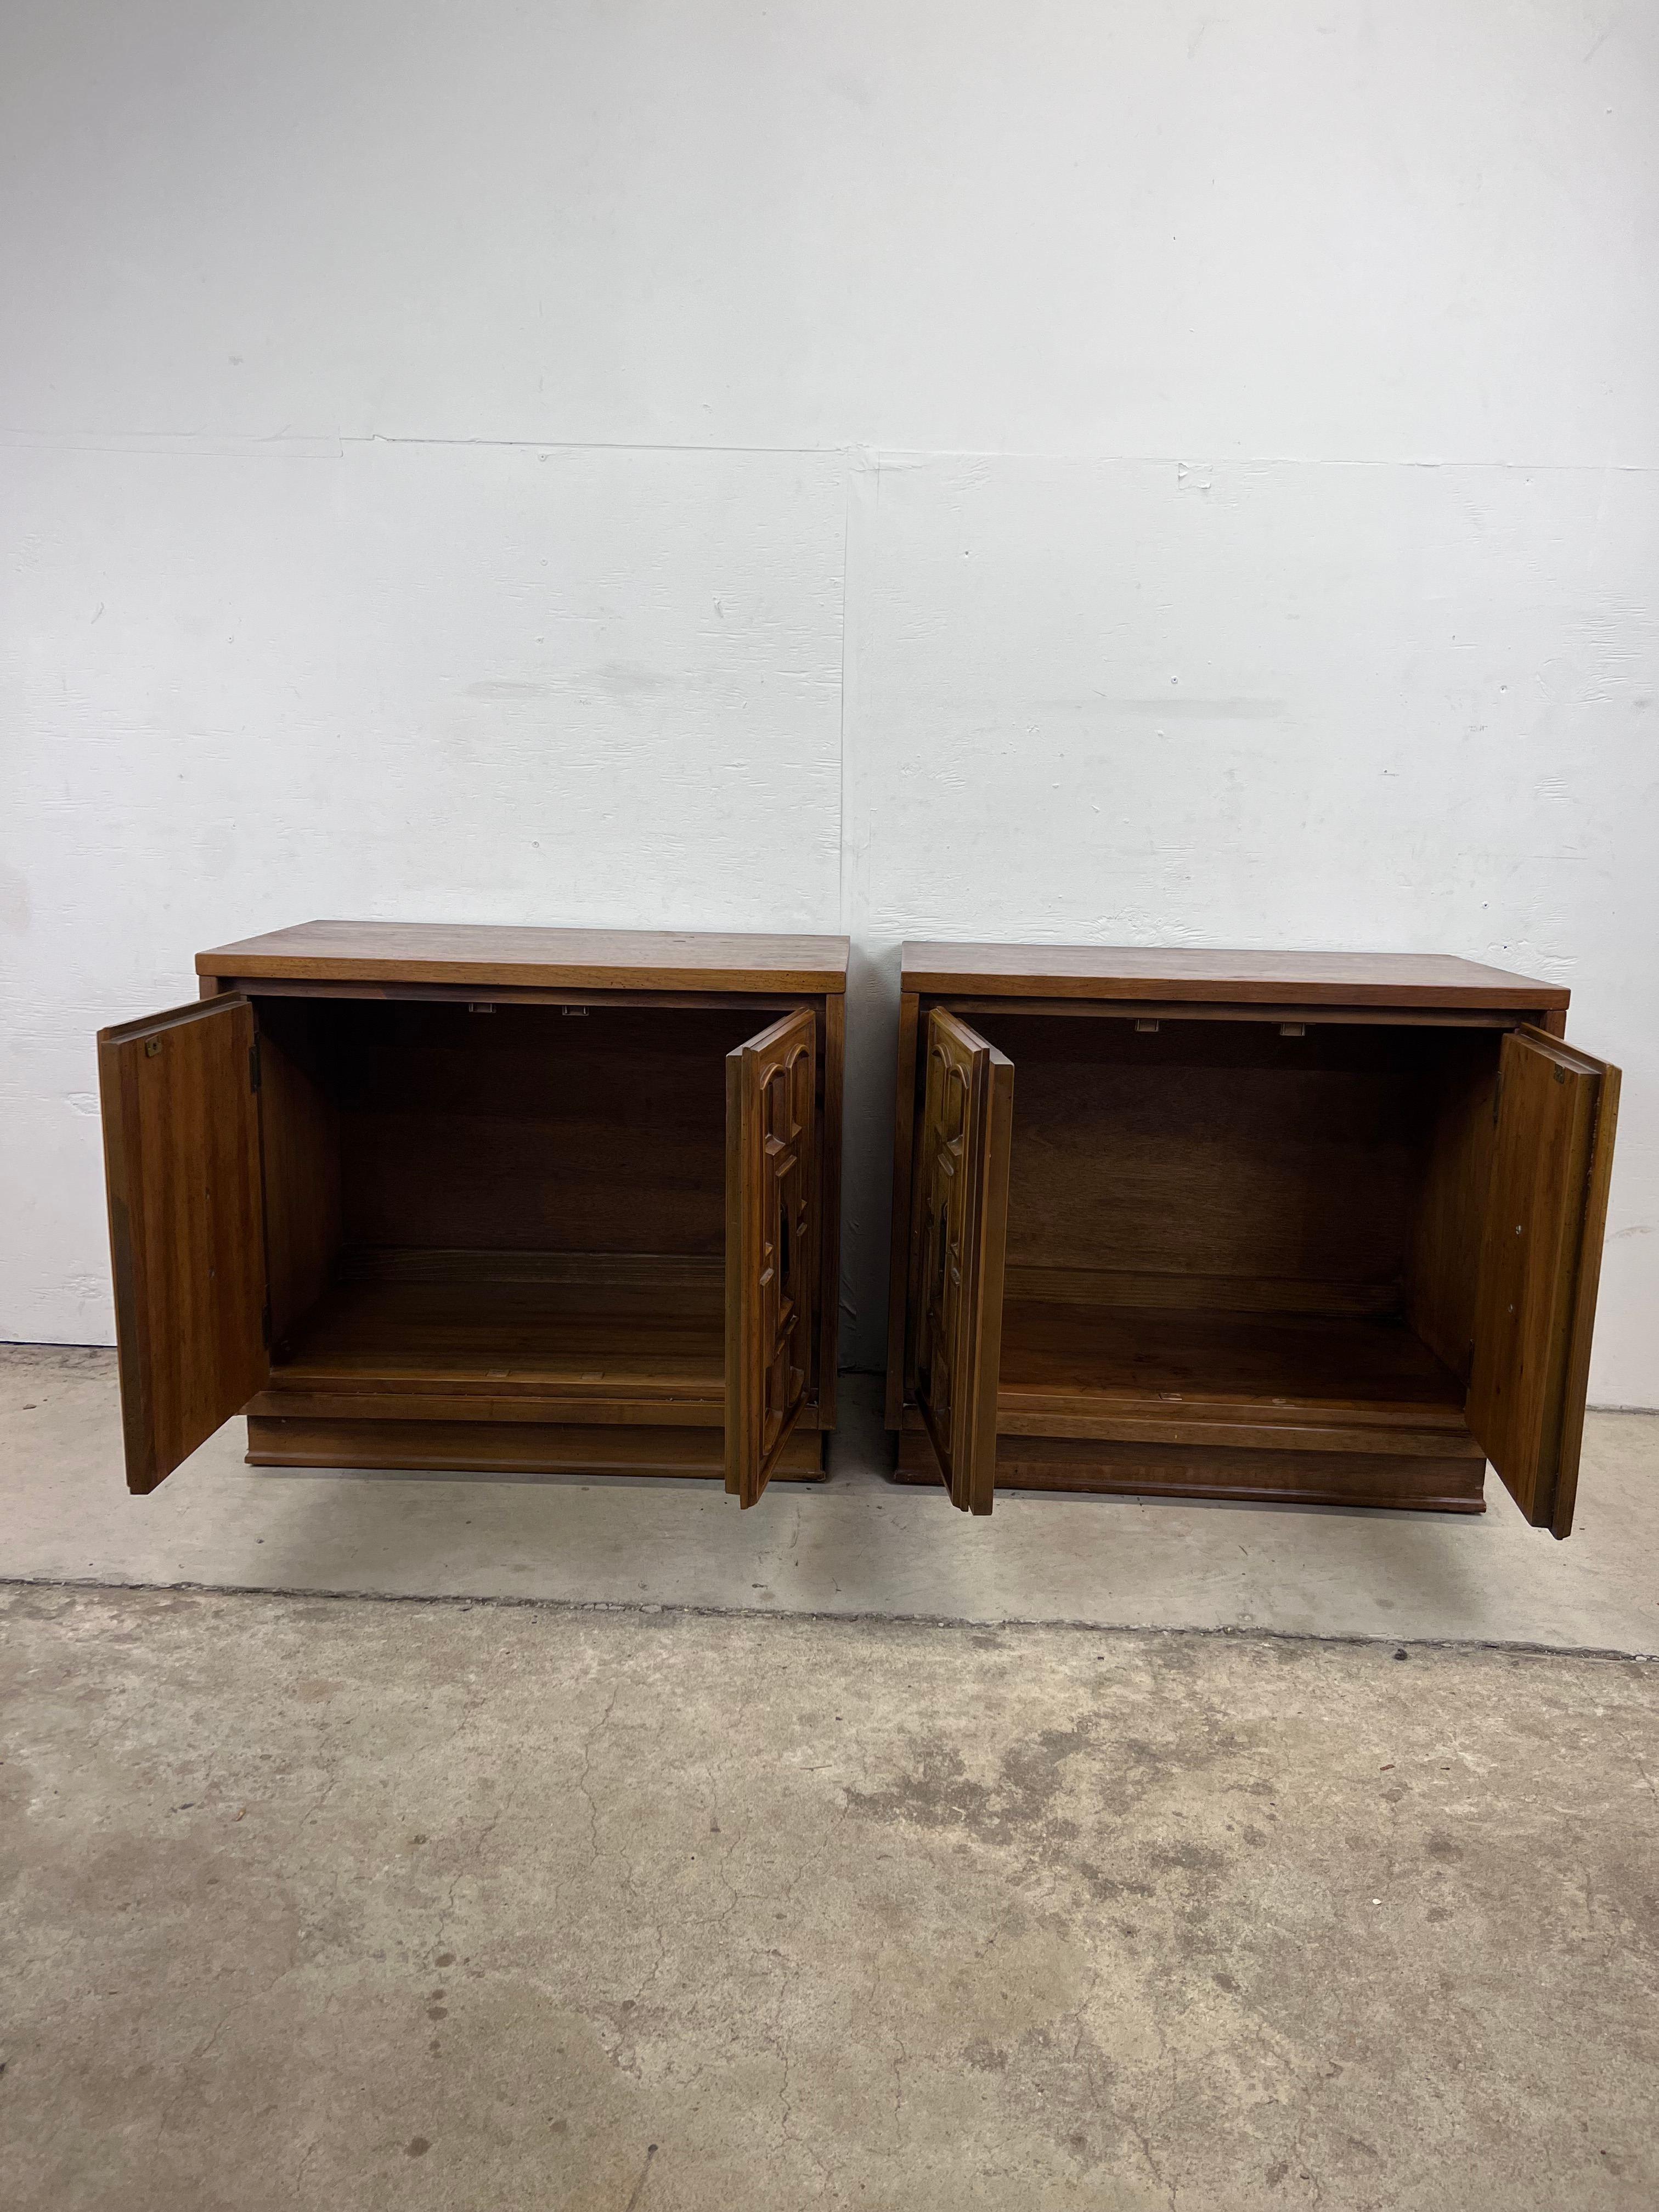 American Pair of Mid Century Spanish Revival End Table Cabinets by Bassett